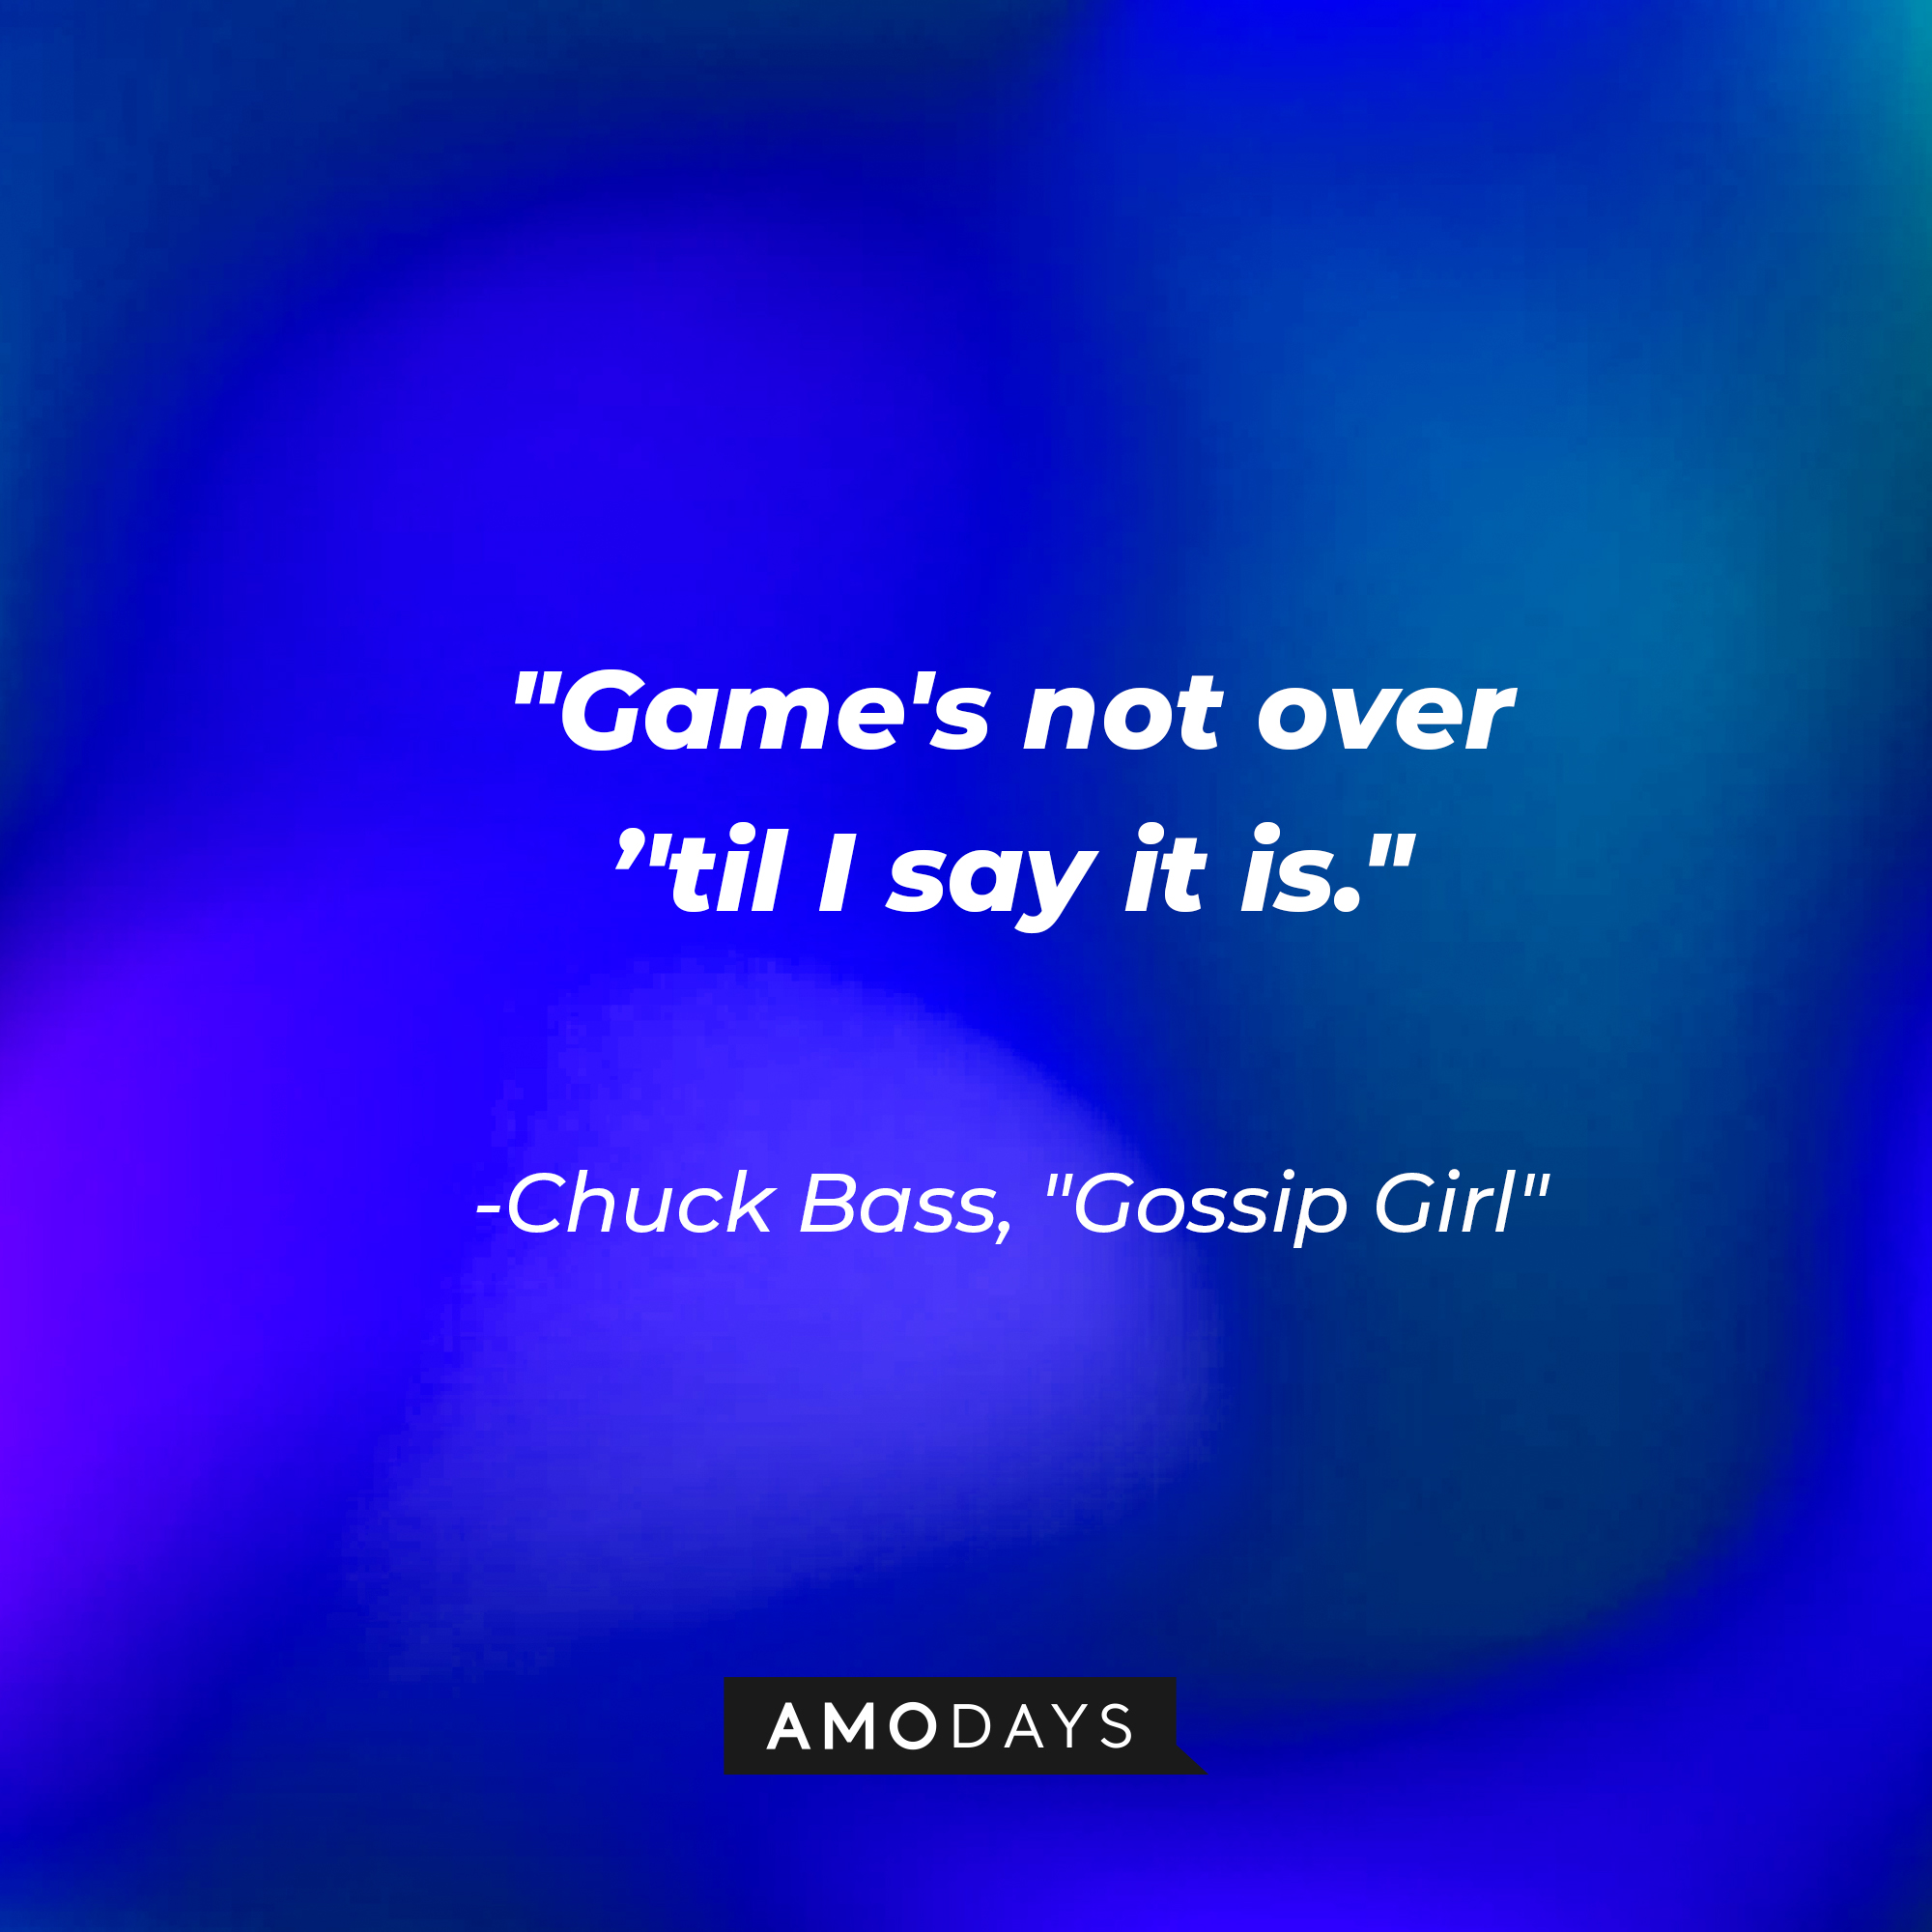 Chuck Bass' quote: "Game's not over ’'til I say it is." | Source: AmoDays